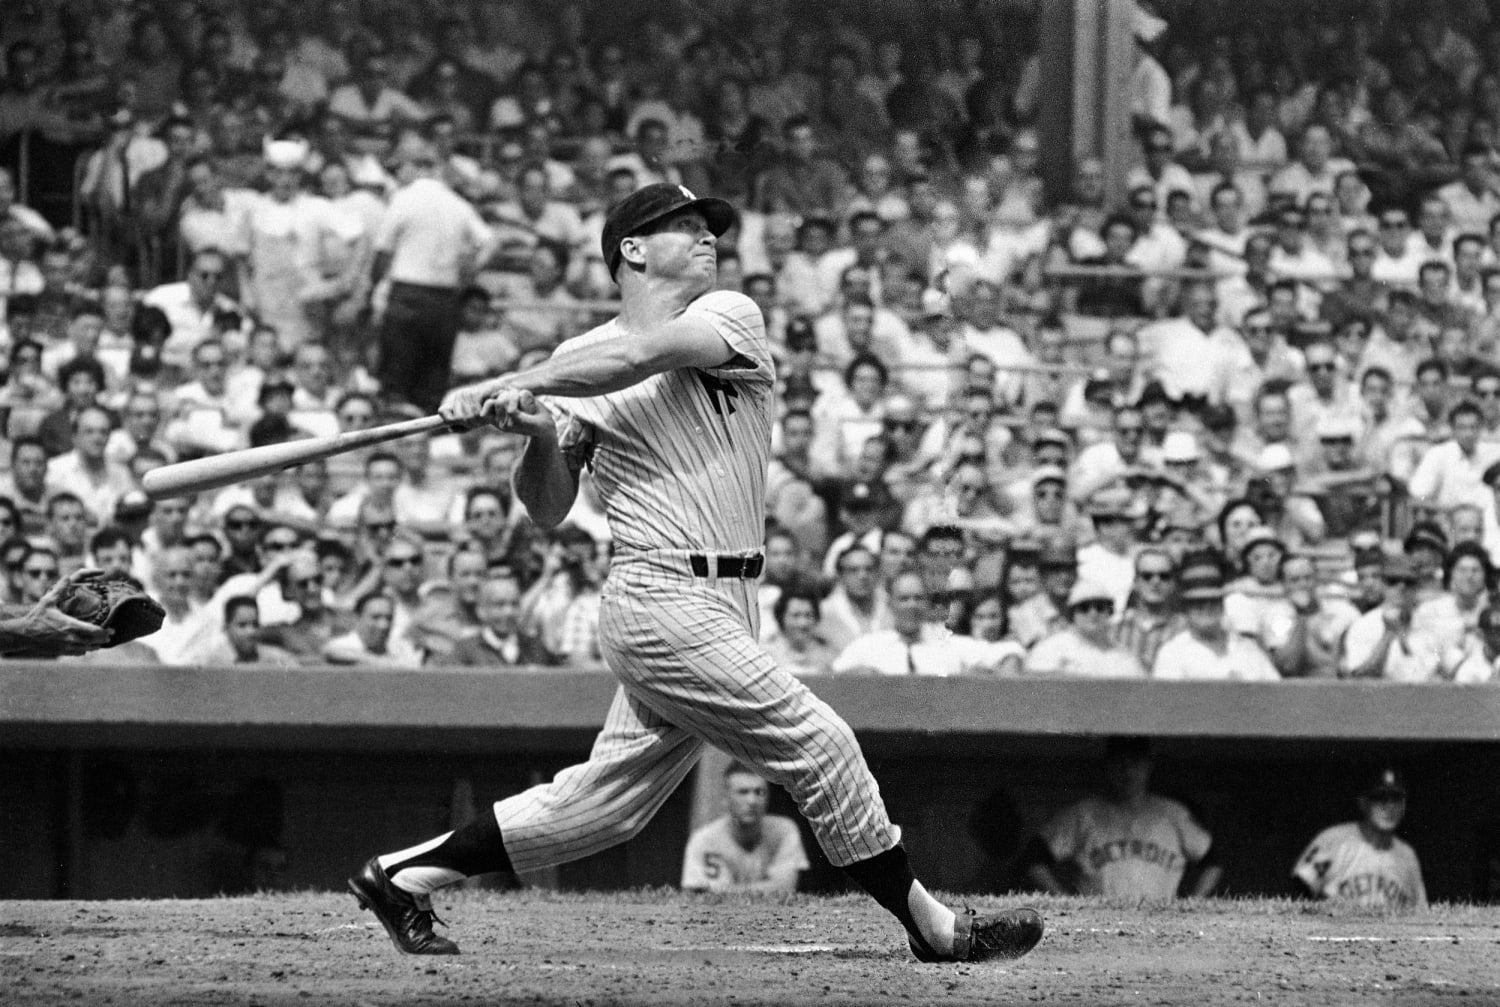 Mickey Mantle's card sells for $12.6million - making it the most expensive  sports item of ALL-TIME